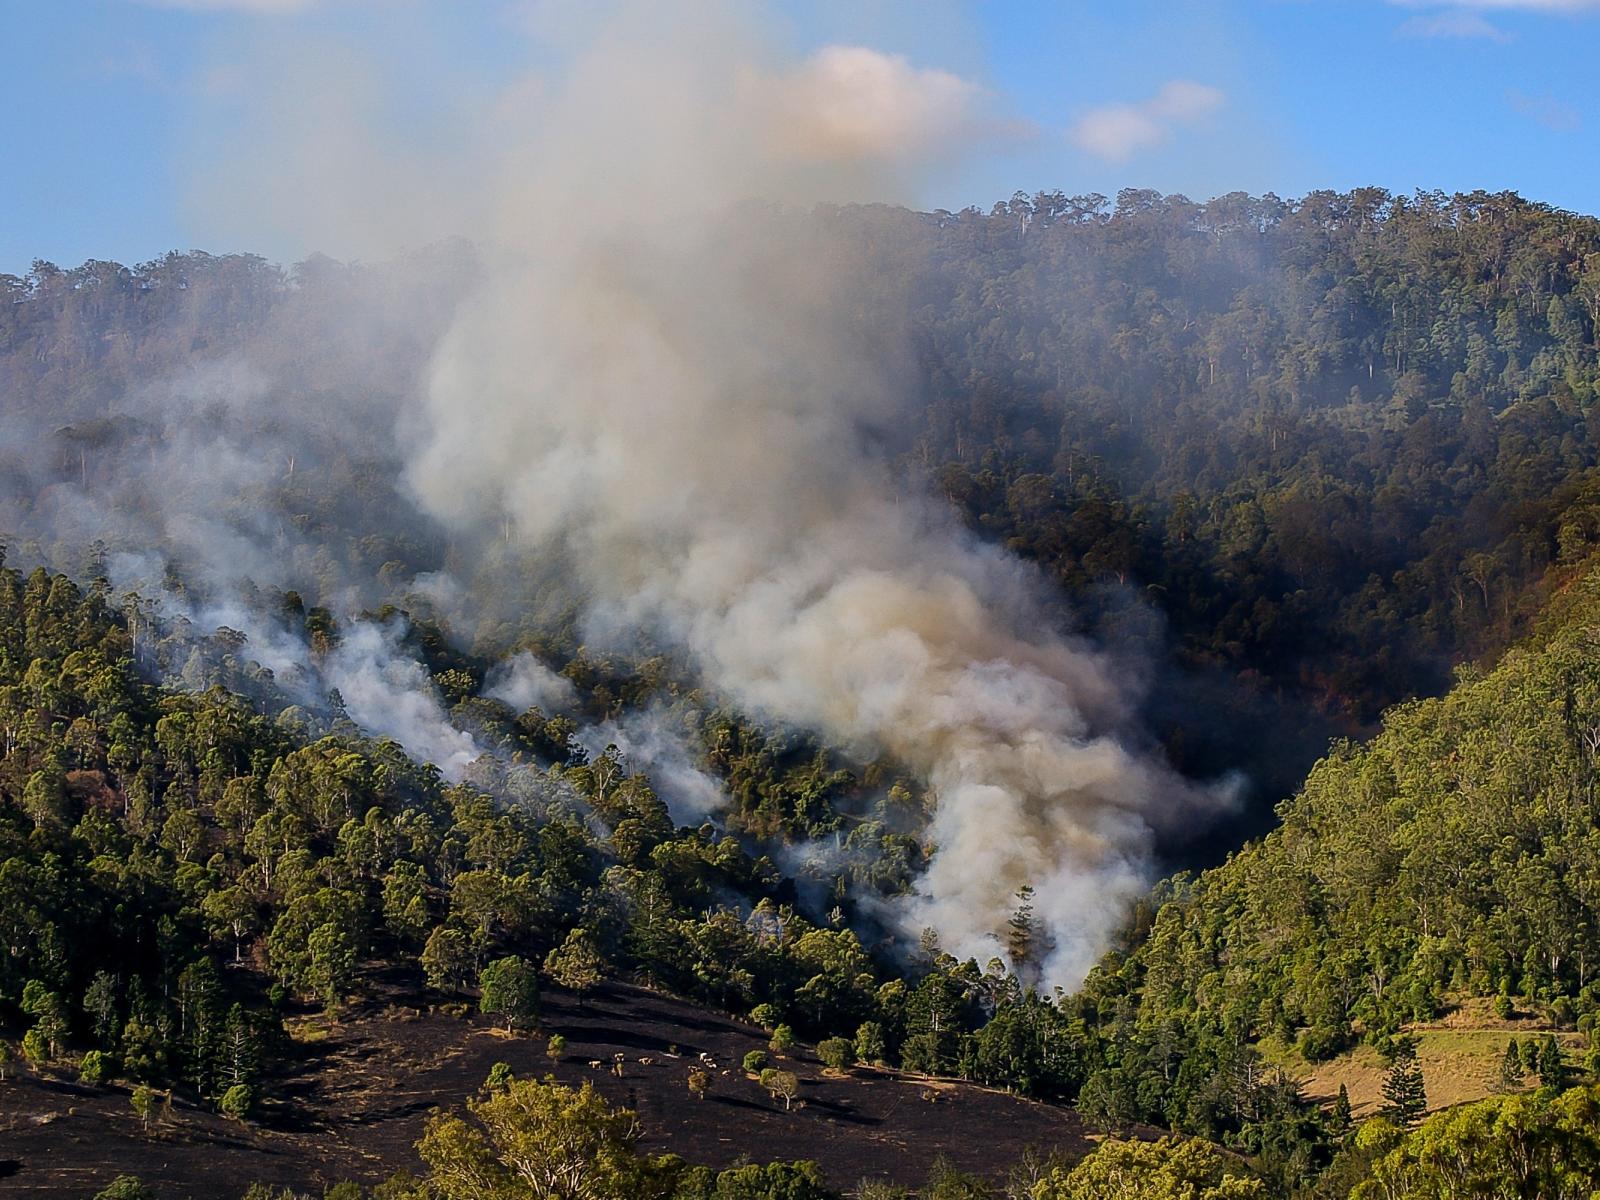 This image depicts a wildfire burning within green, forested hills. Dark smoke billows upward.